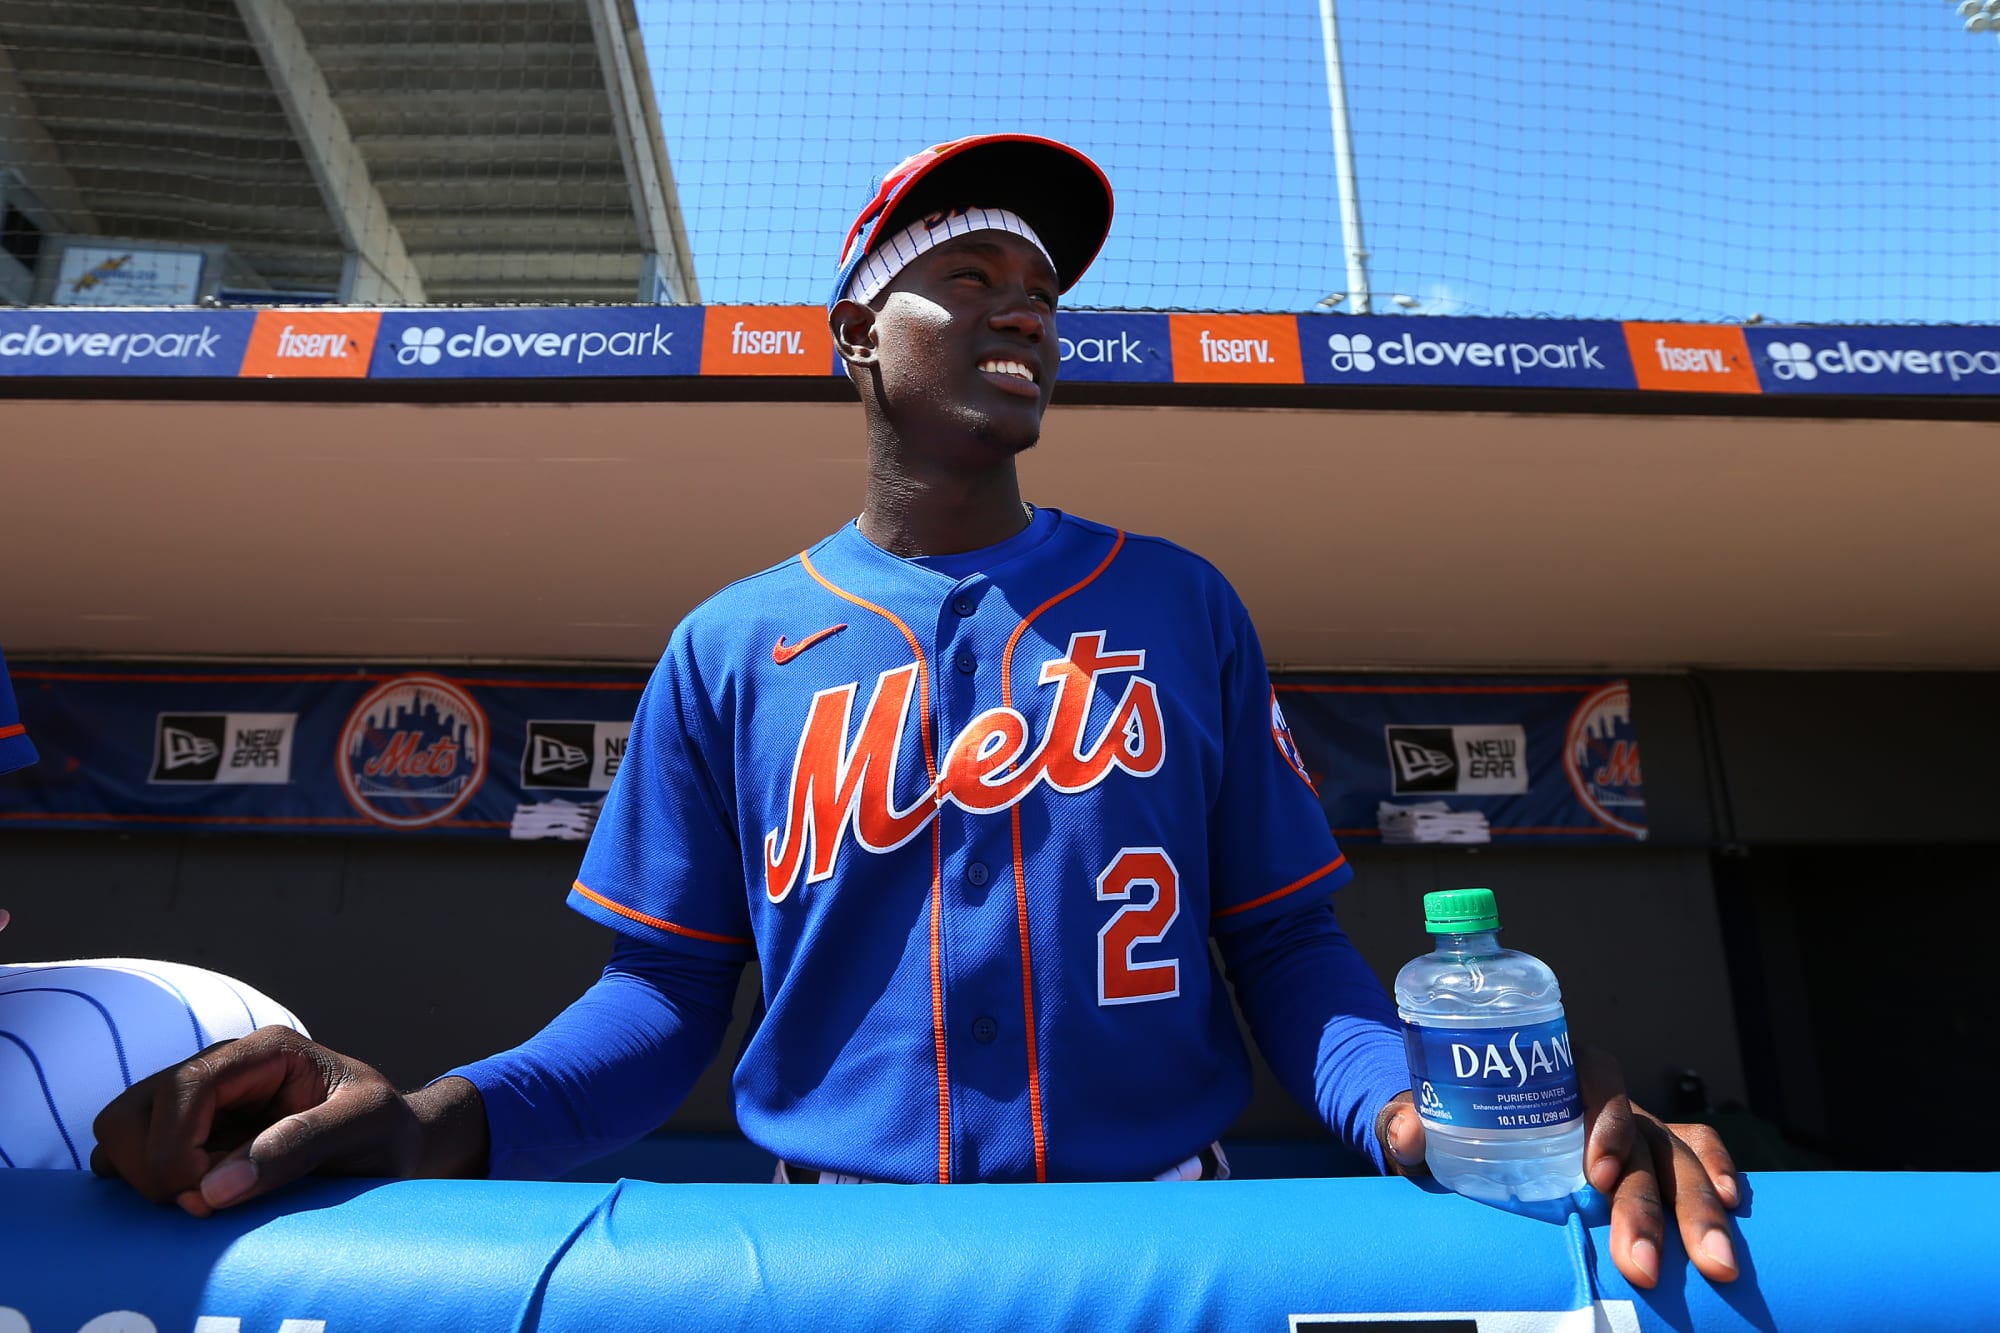 NY Mets minor league storylines to look forward to in 2021